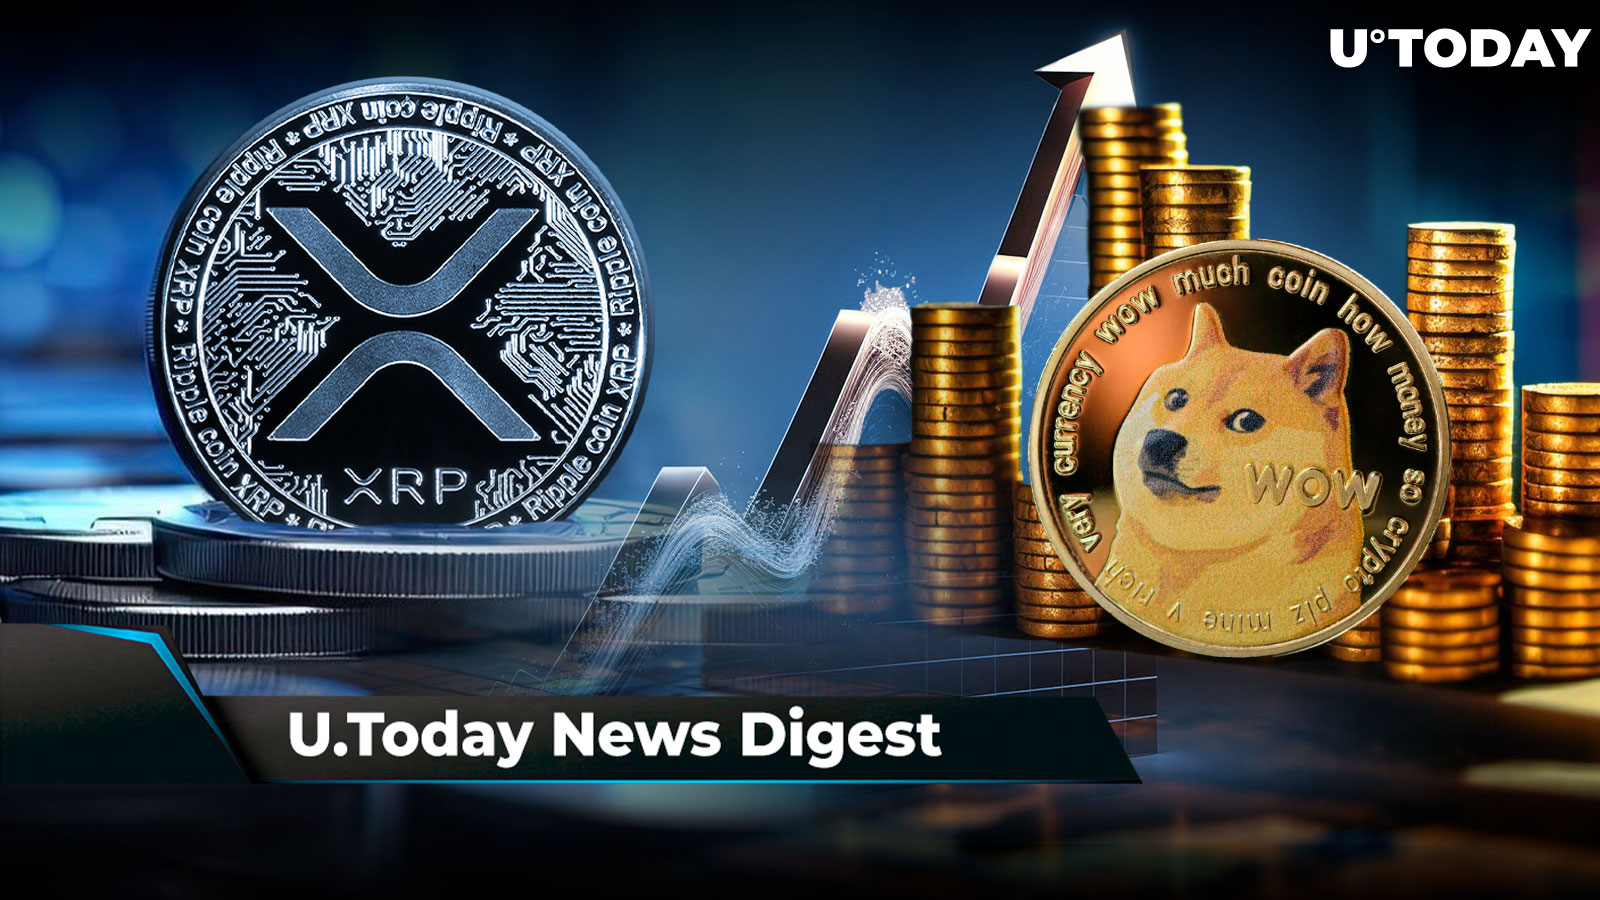 XRP Futures Listed on Major Exchange, DOGE's Current Price Echoes Pre-Surge Levels of 2021, SHIB Burn Rate up 704%: Crypto News Digest by U.Today